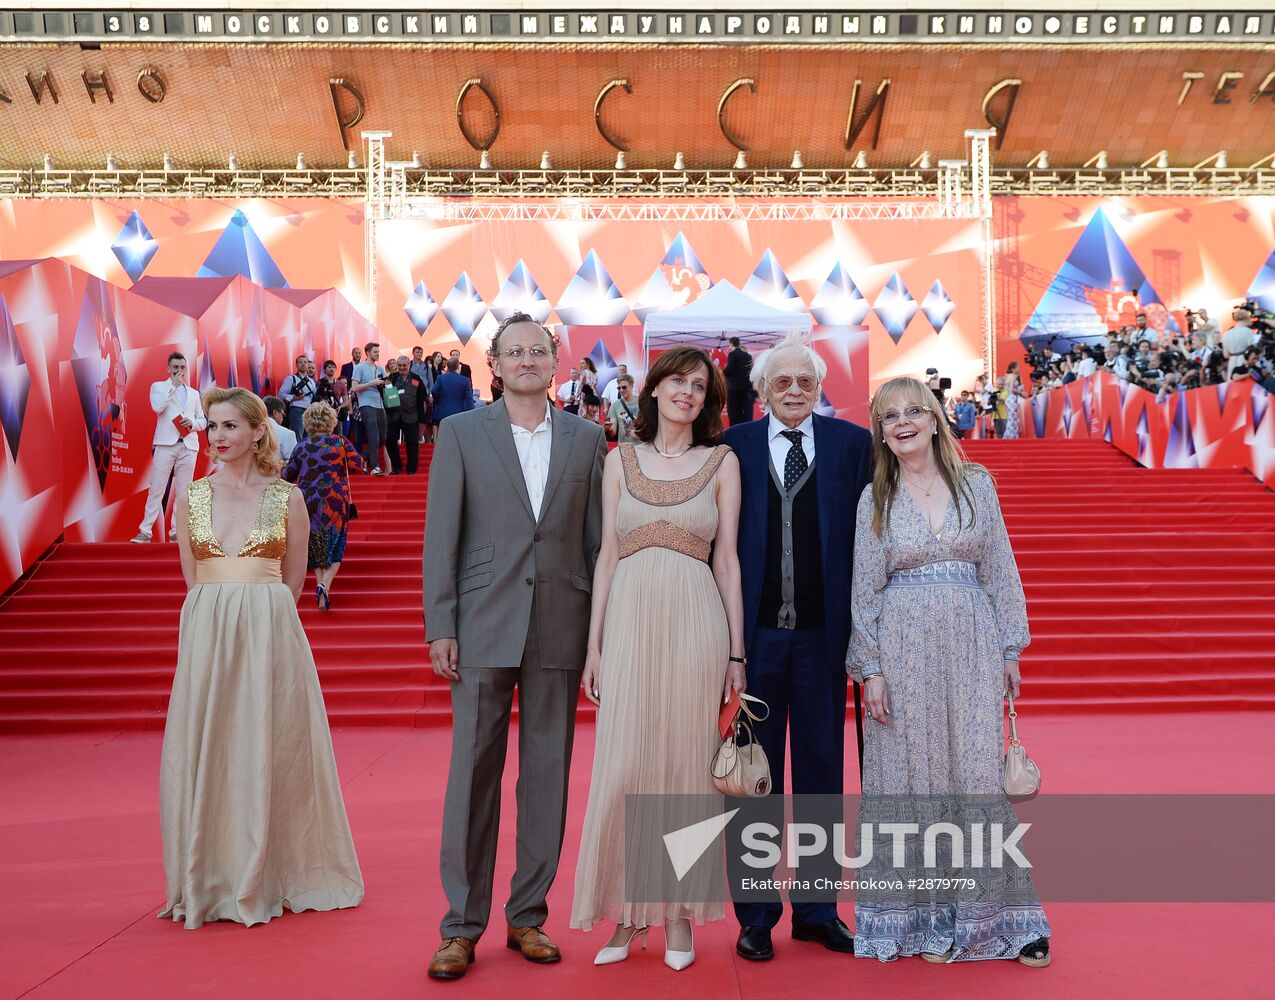 Opening of 38th Moscow International Film Festval